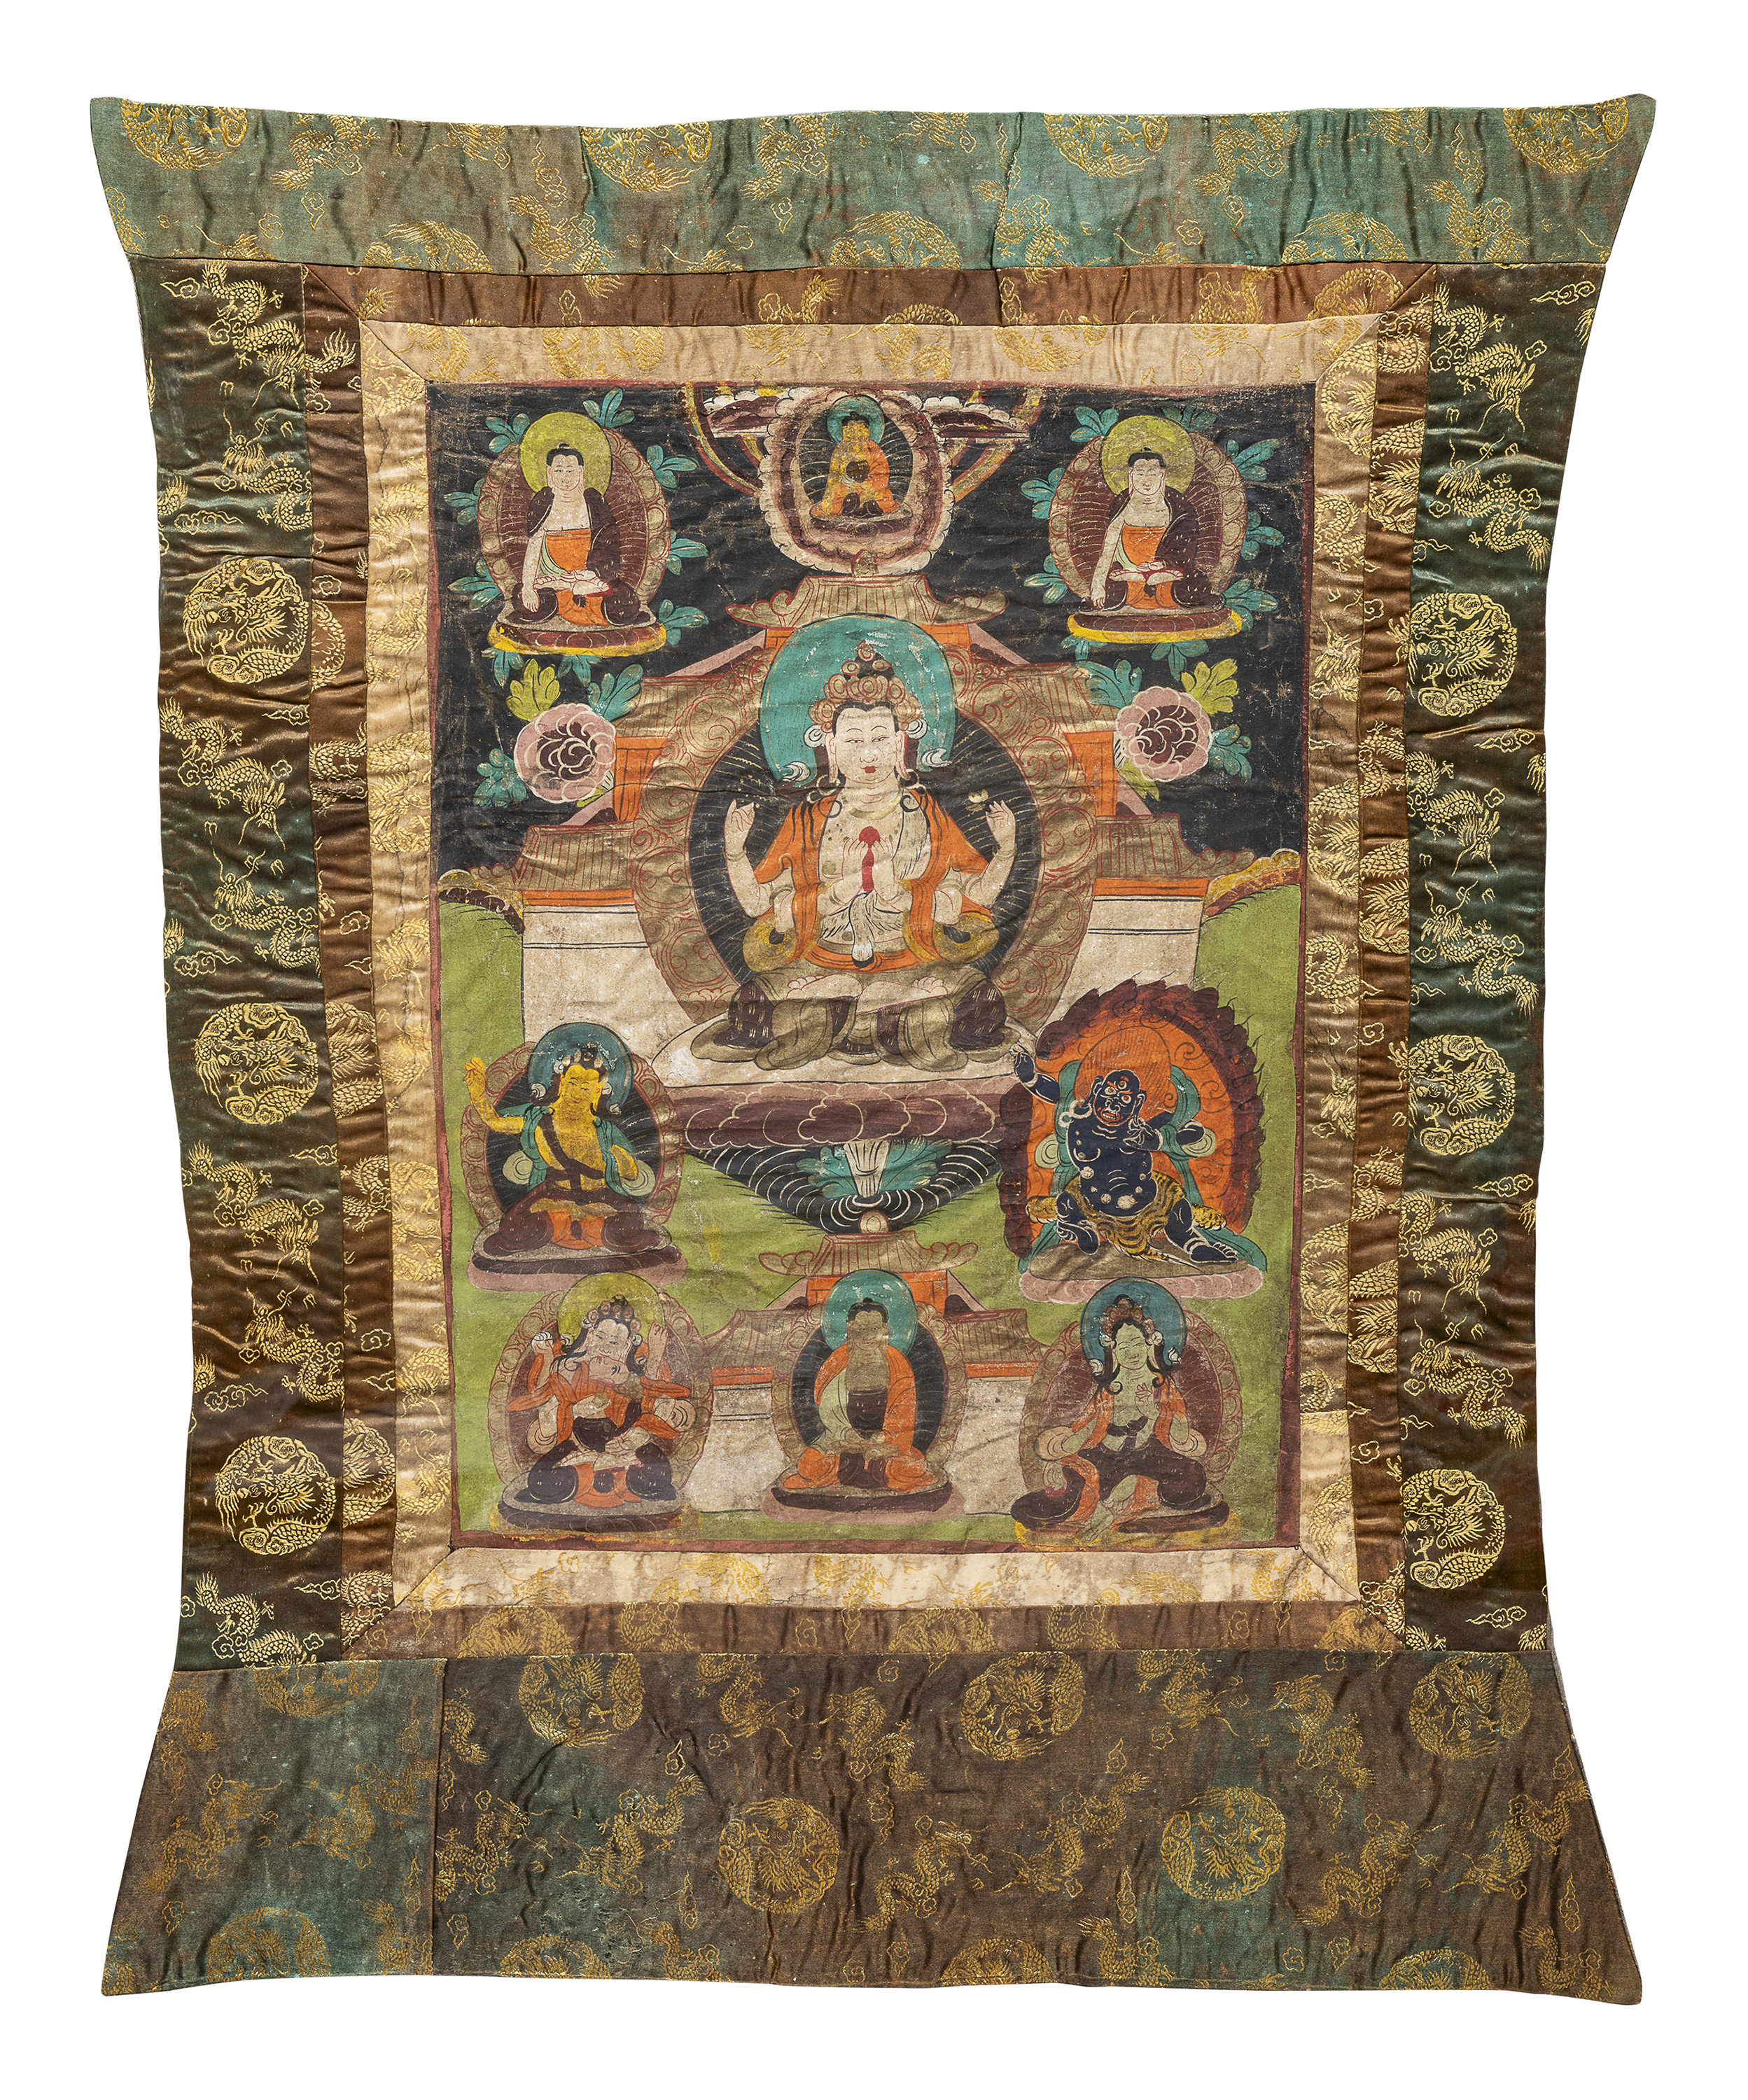 A PAIR OF TANKA ON SILK. PROBABLY TIBET EARLY 20TH CENTURY. - Image 2 of 2